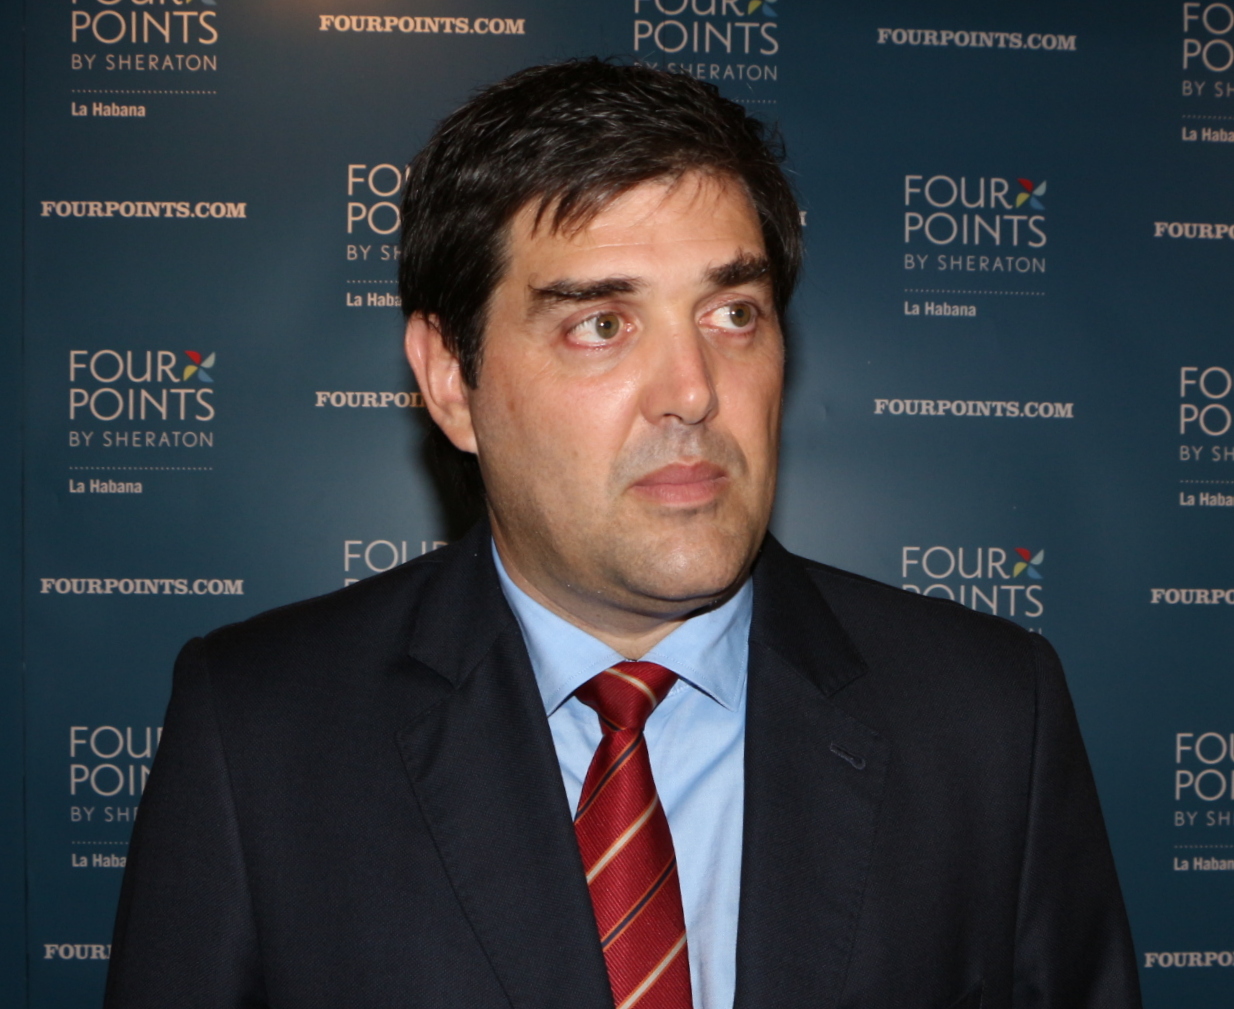 Q & A with Pablo Casal, General Manager of Four Points by Sheraton La Habana Hotel